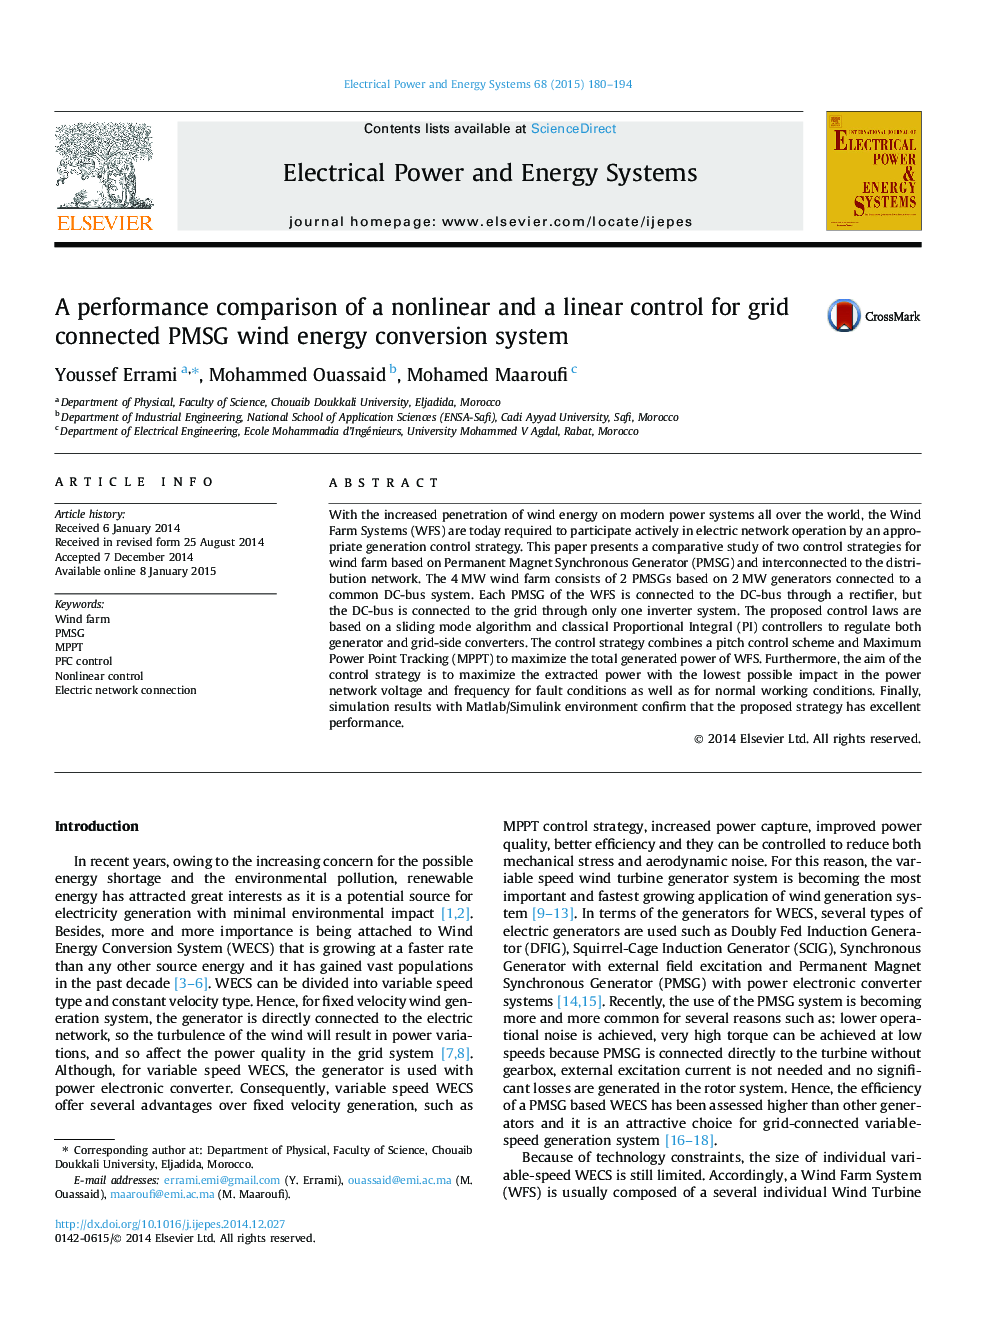 A performance comparison of a nonlinear and a linear control for grid connected PMSG wind energy conversion system